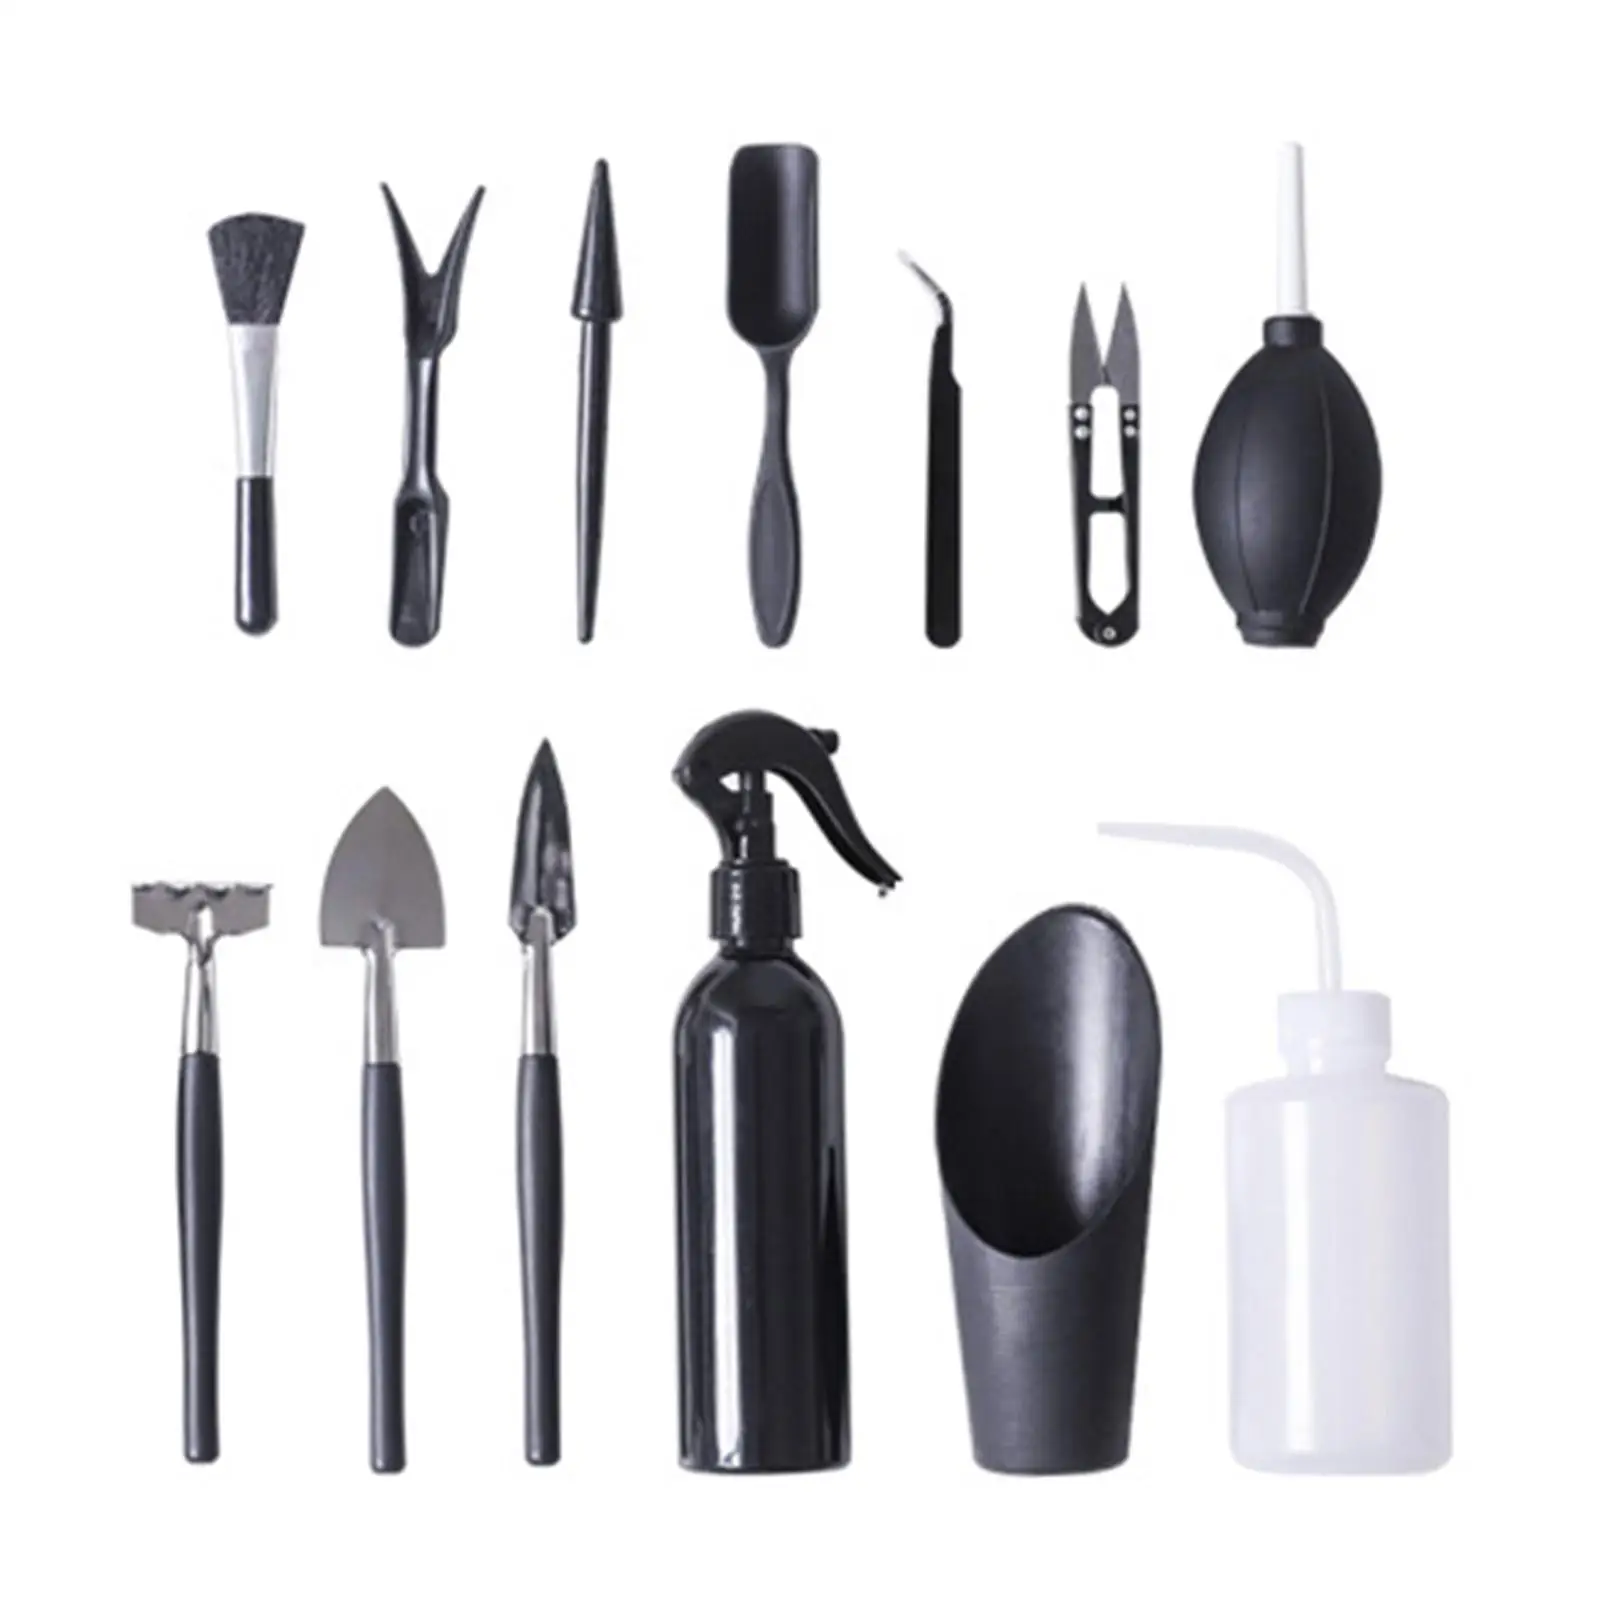 Succulent Hand Transplanting Tools Kit 13 Pieces for Indoor Garden, Potting Accessory Stainless Steel, PP Materials Professional